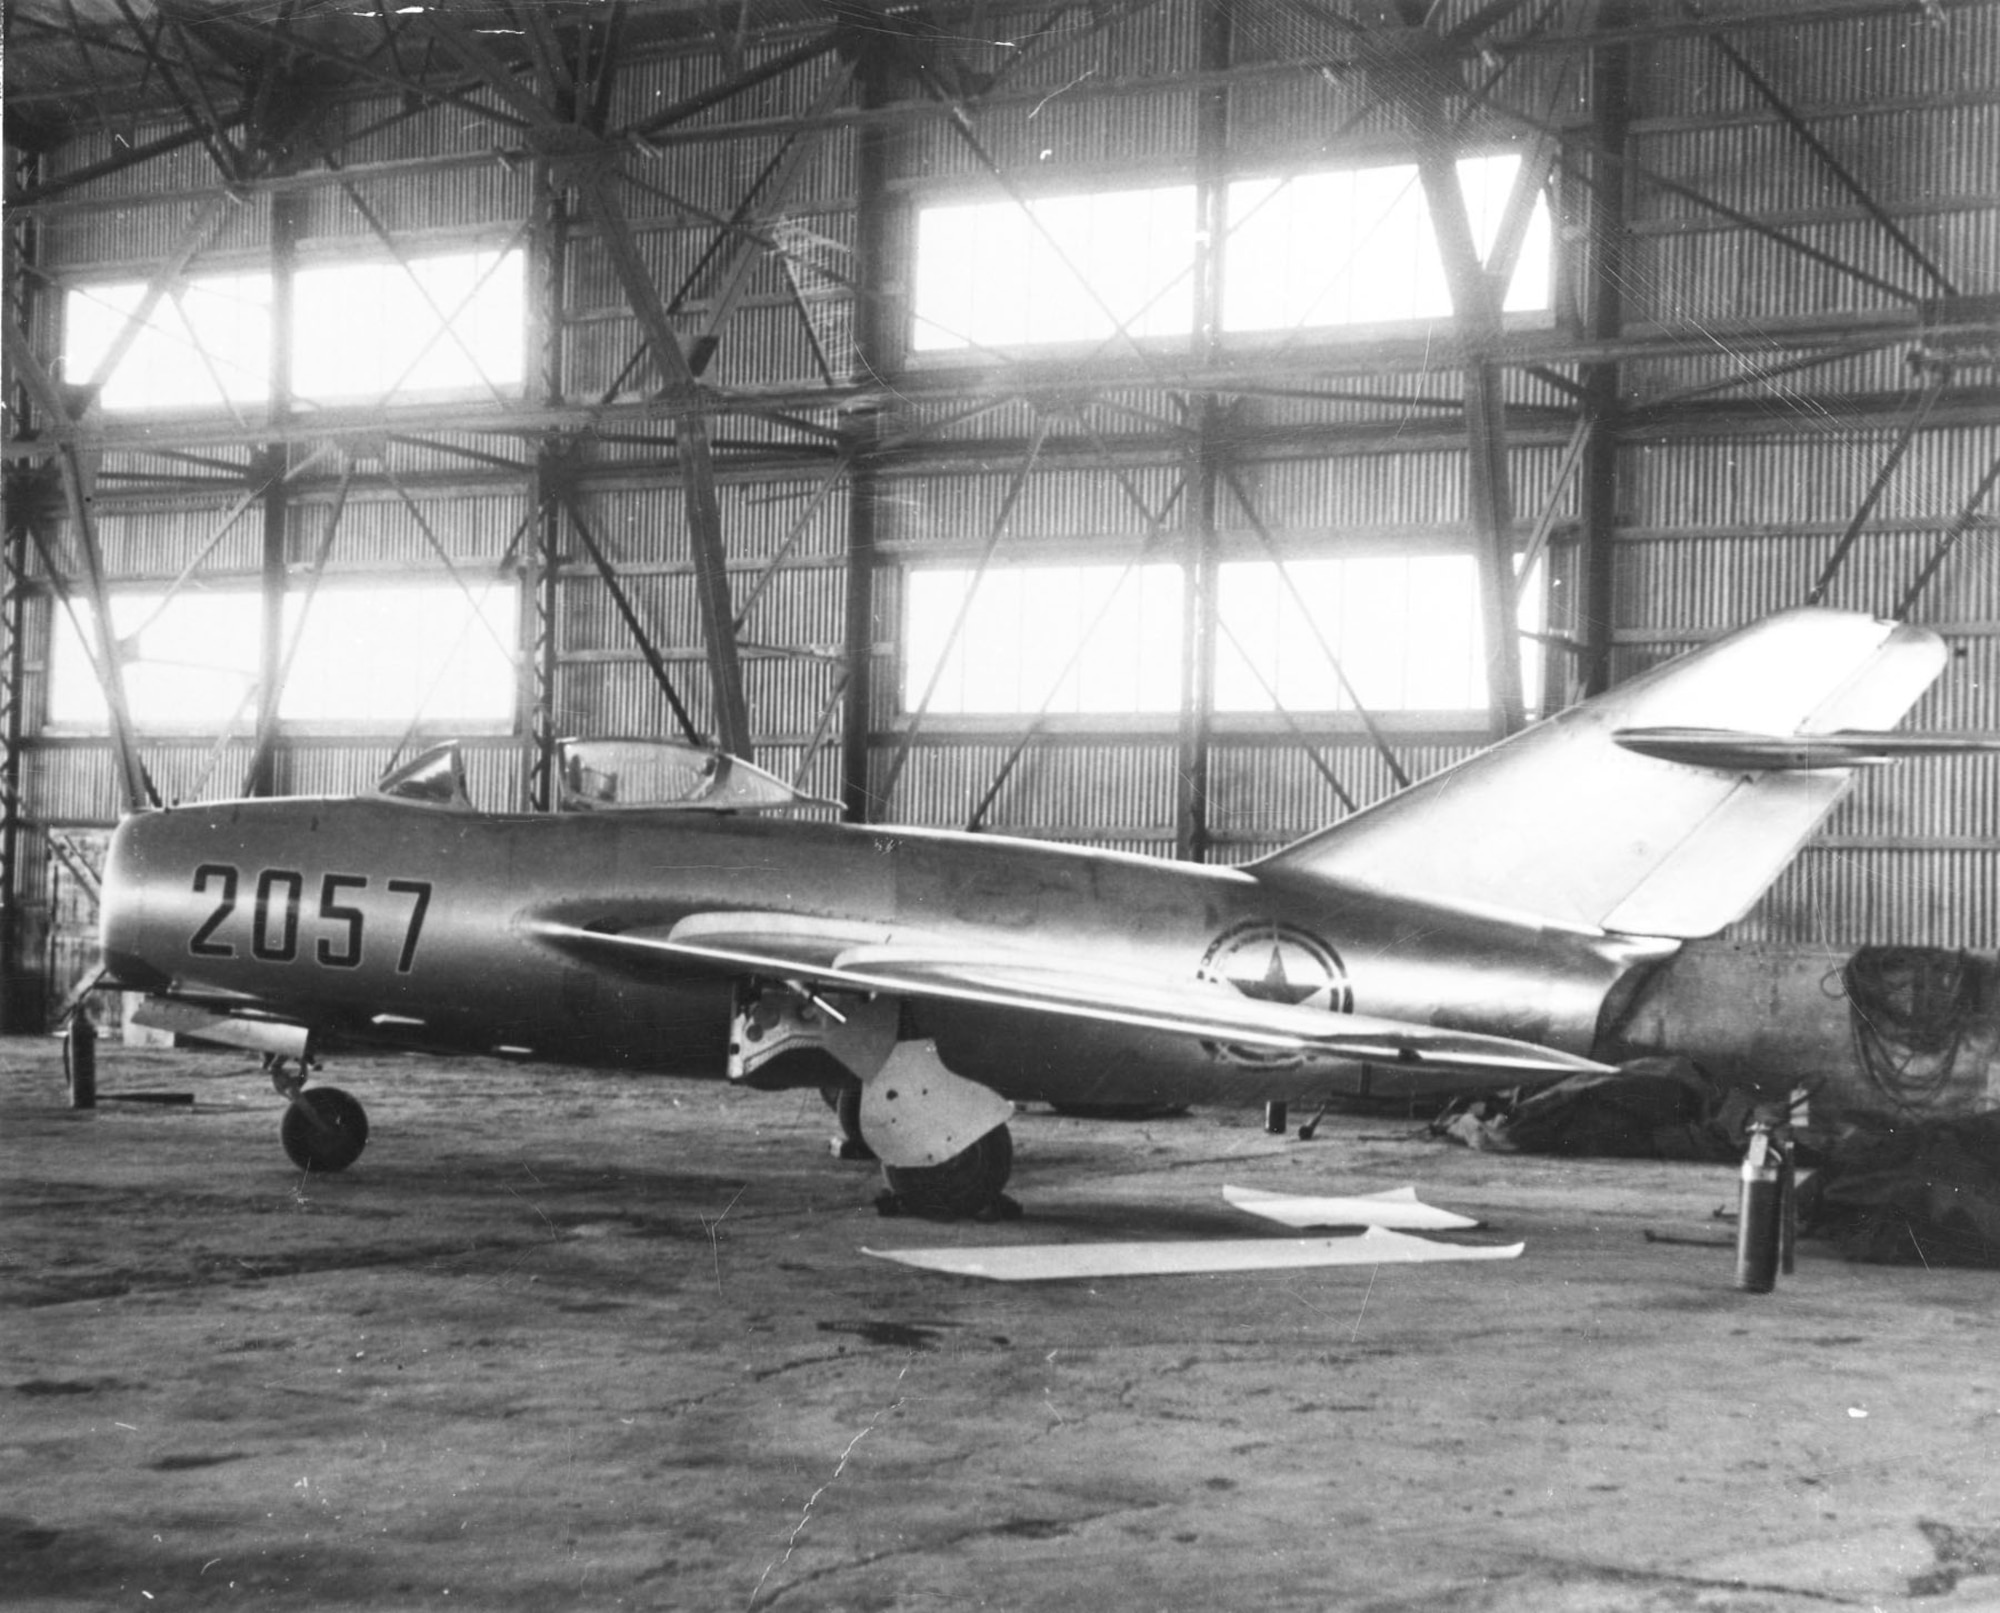 The MiG-15b is secured in a hangar at Kimpo Air Base. (U.S. Air Force photo)